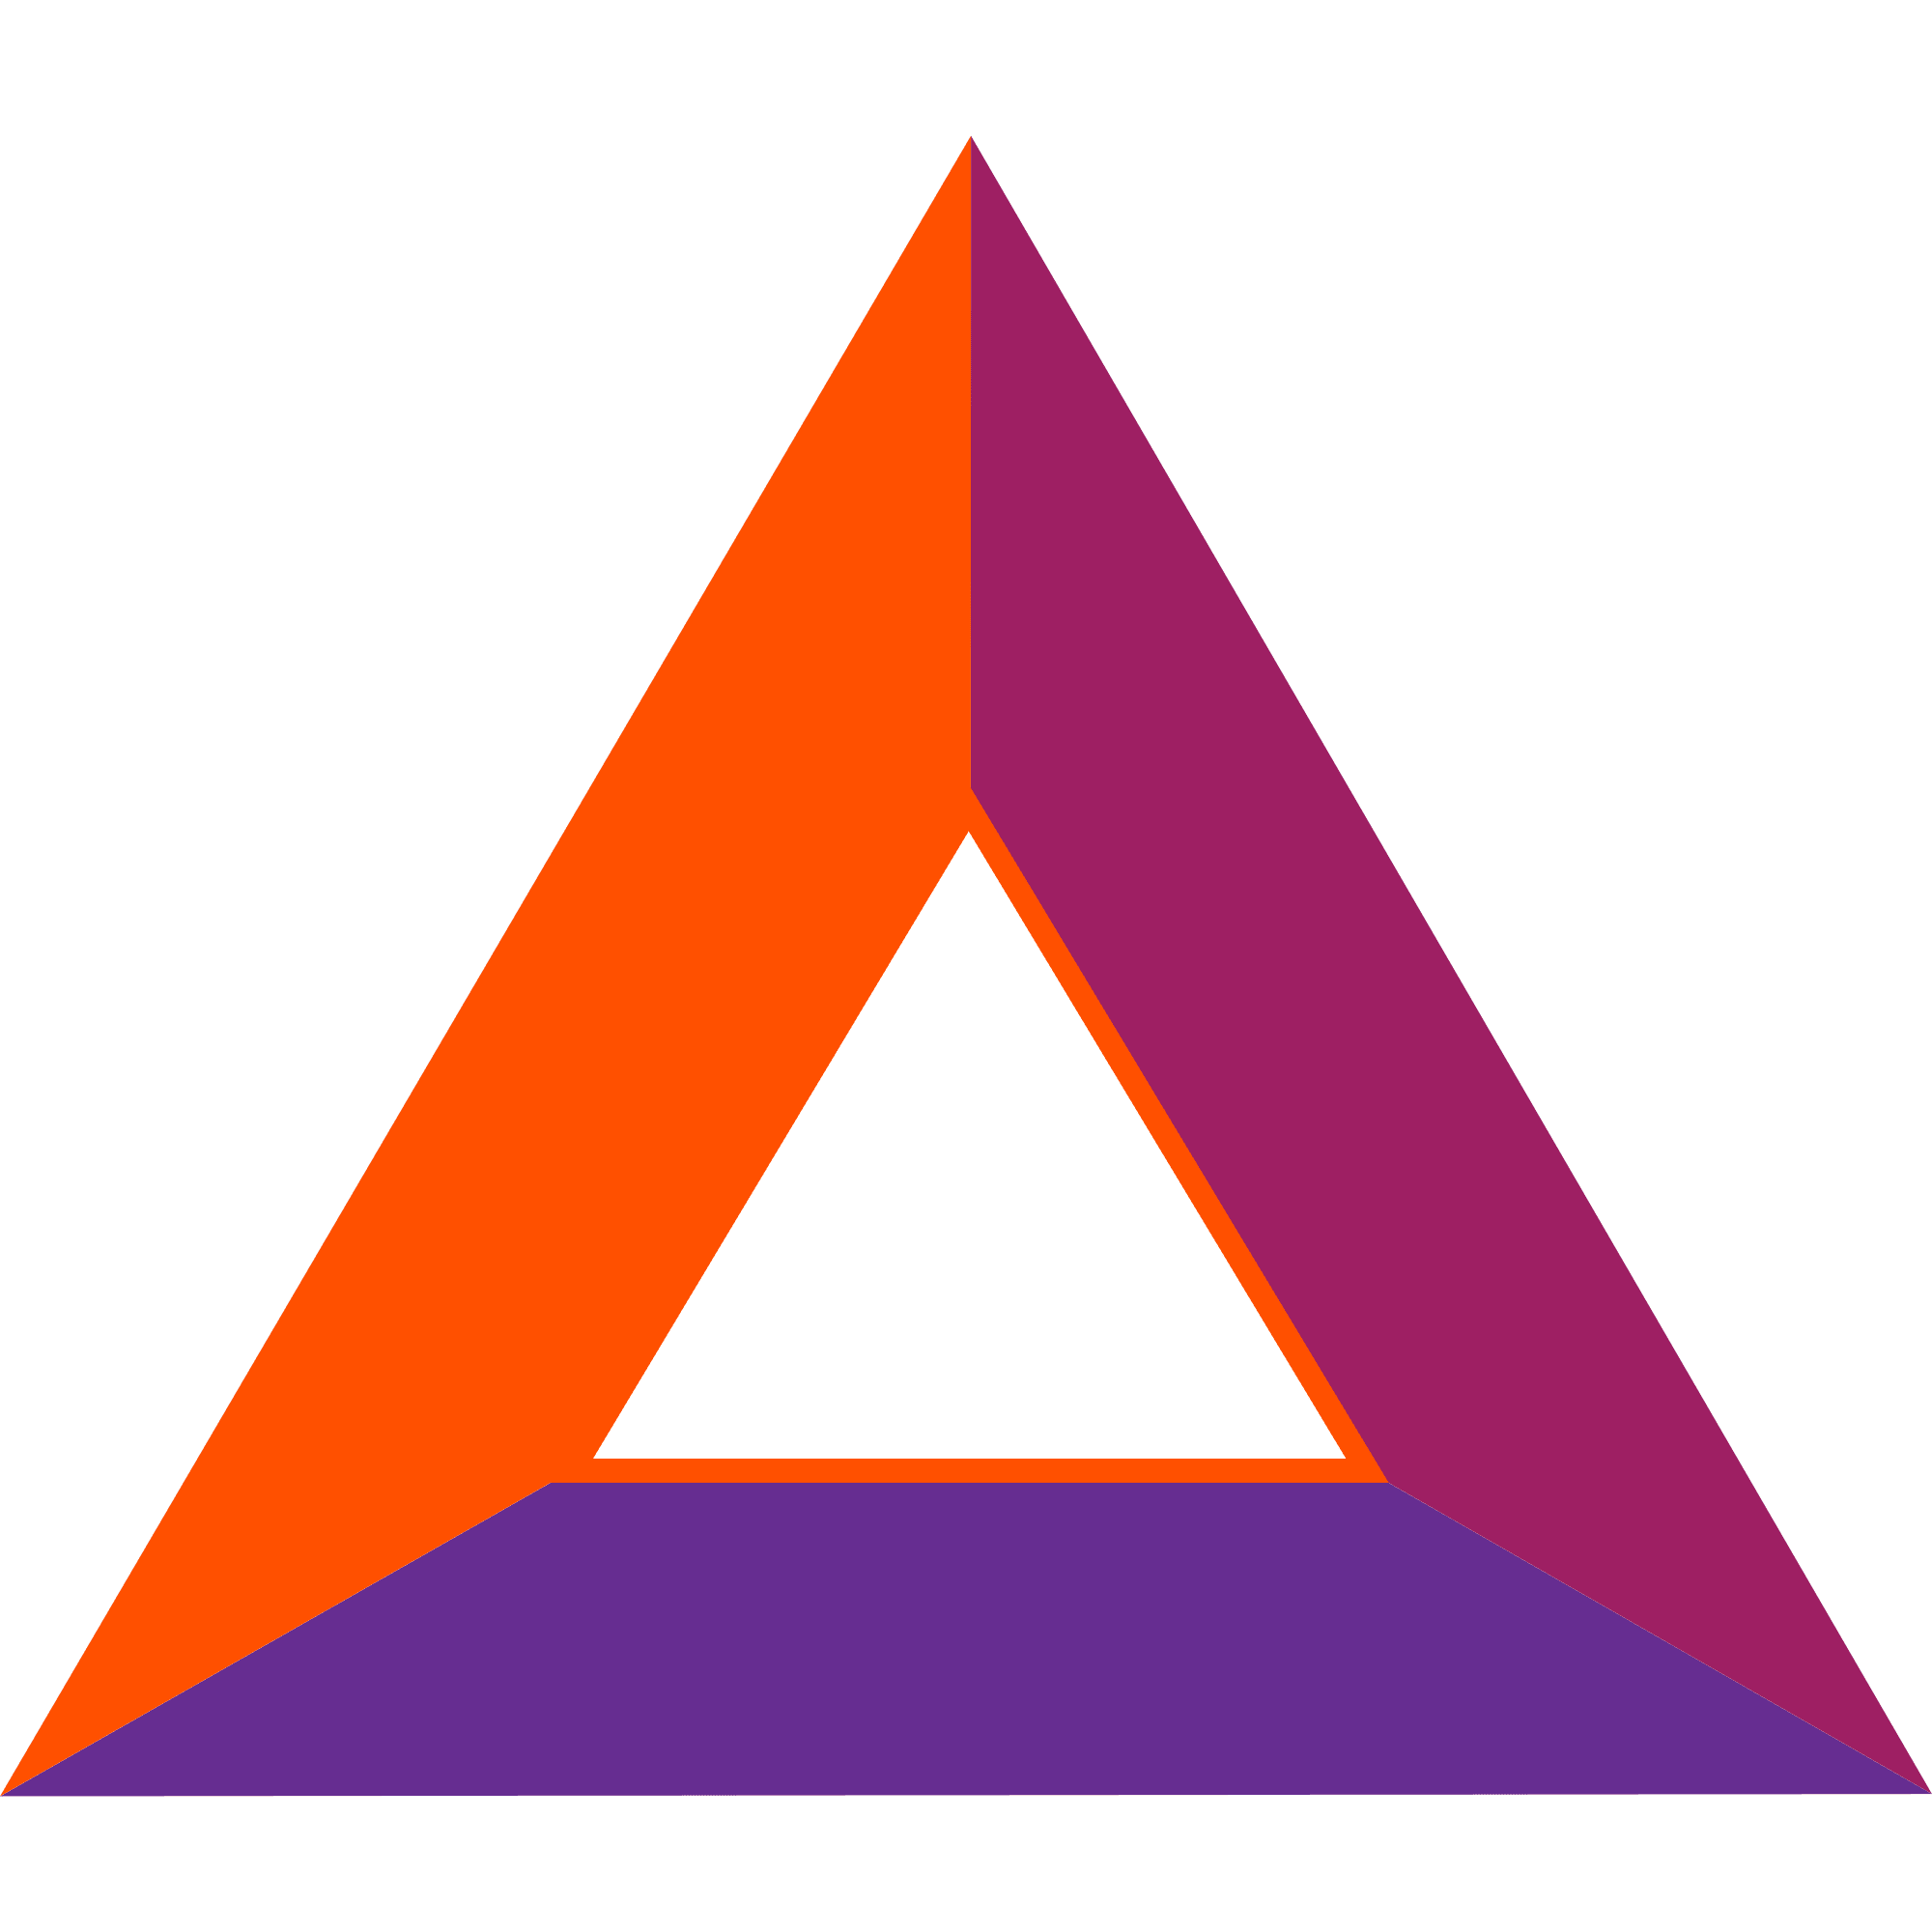 Basic Attention Token logo in png format